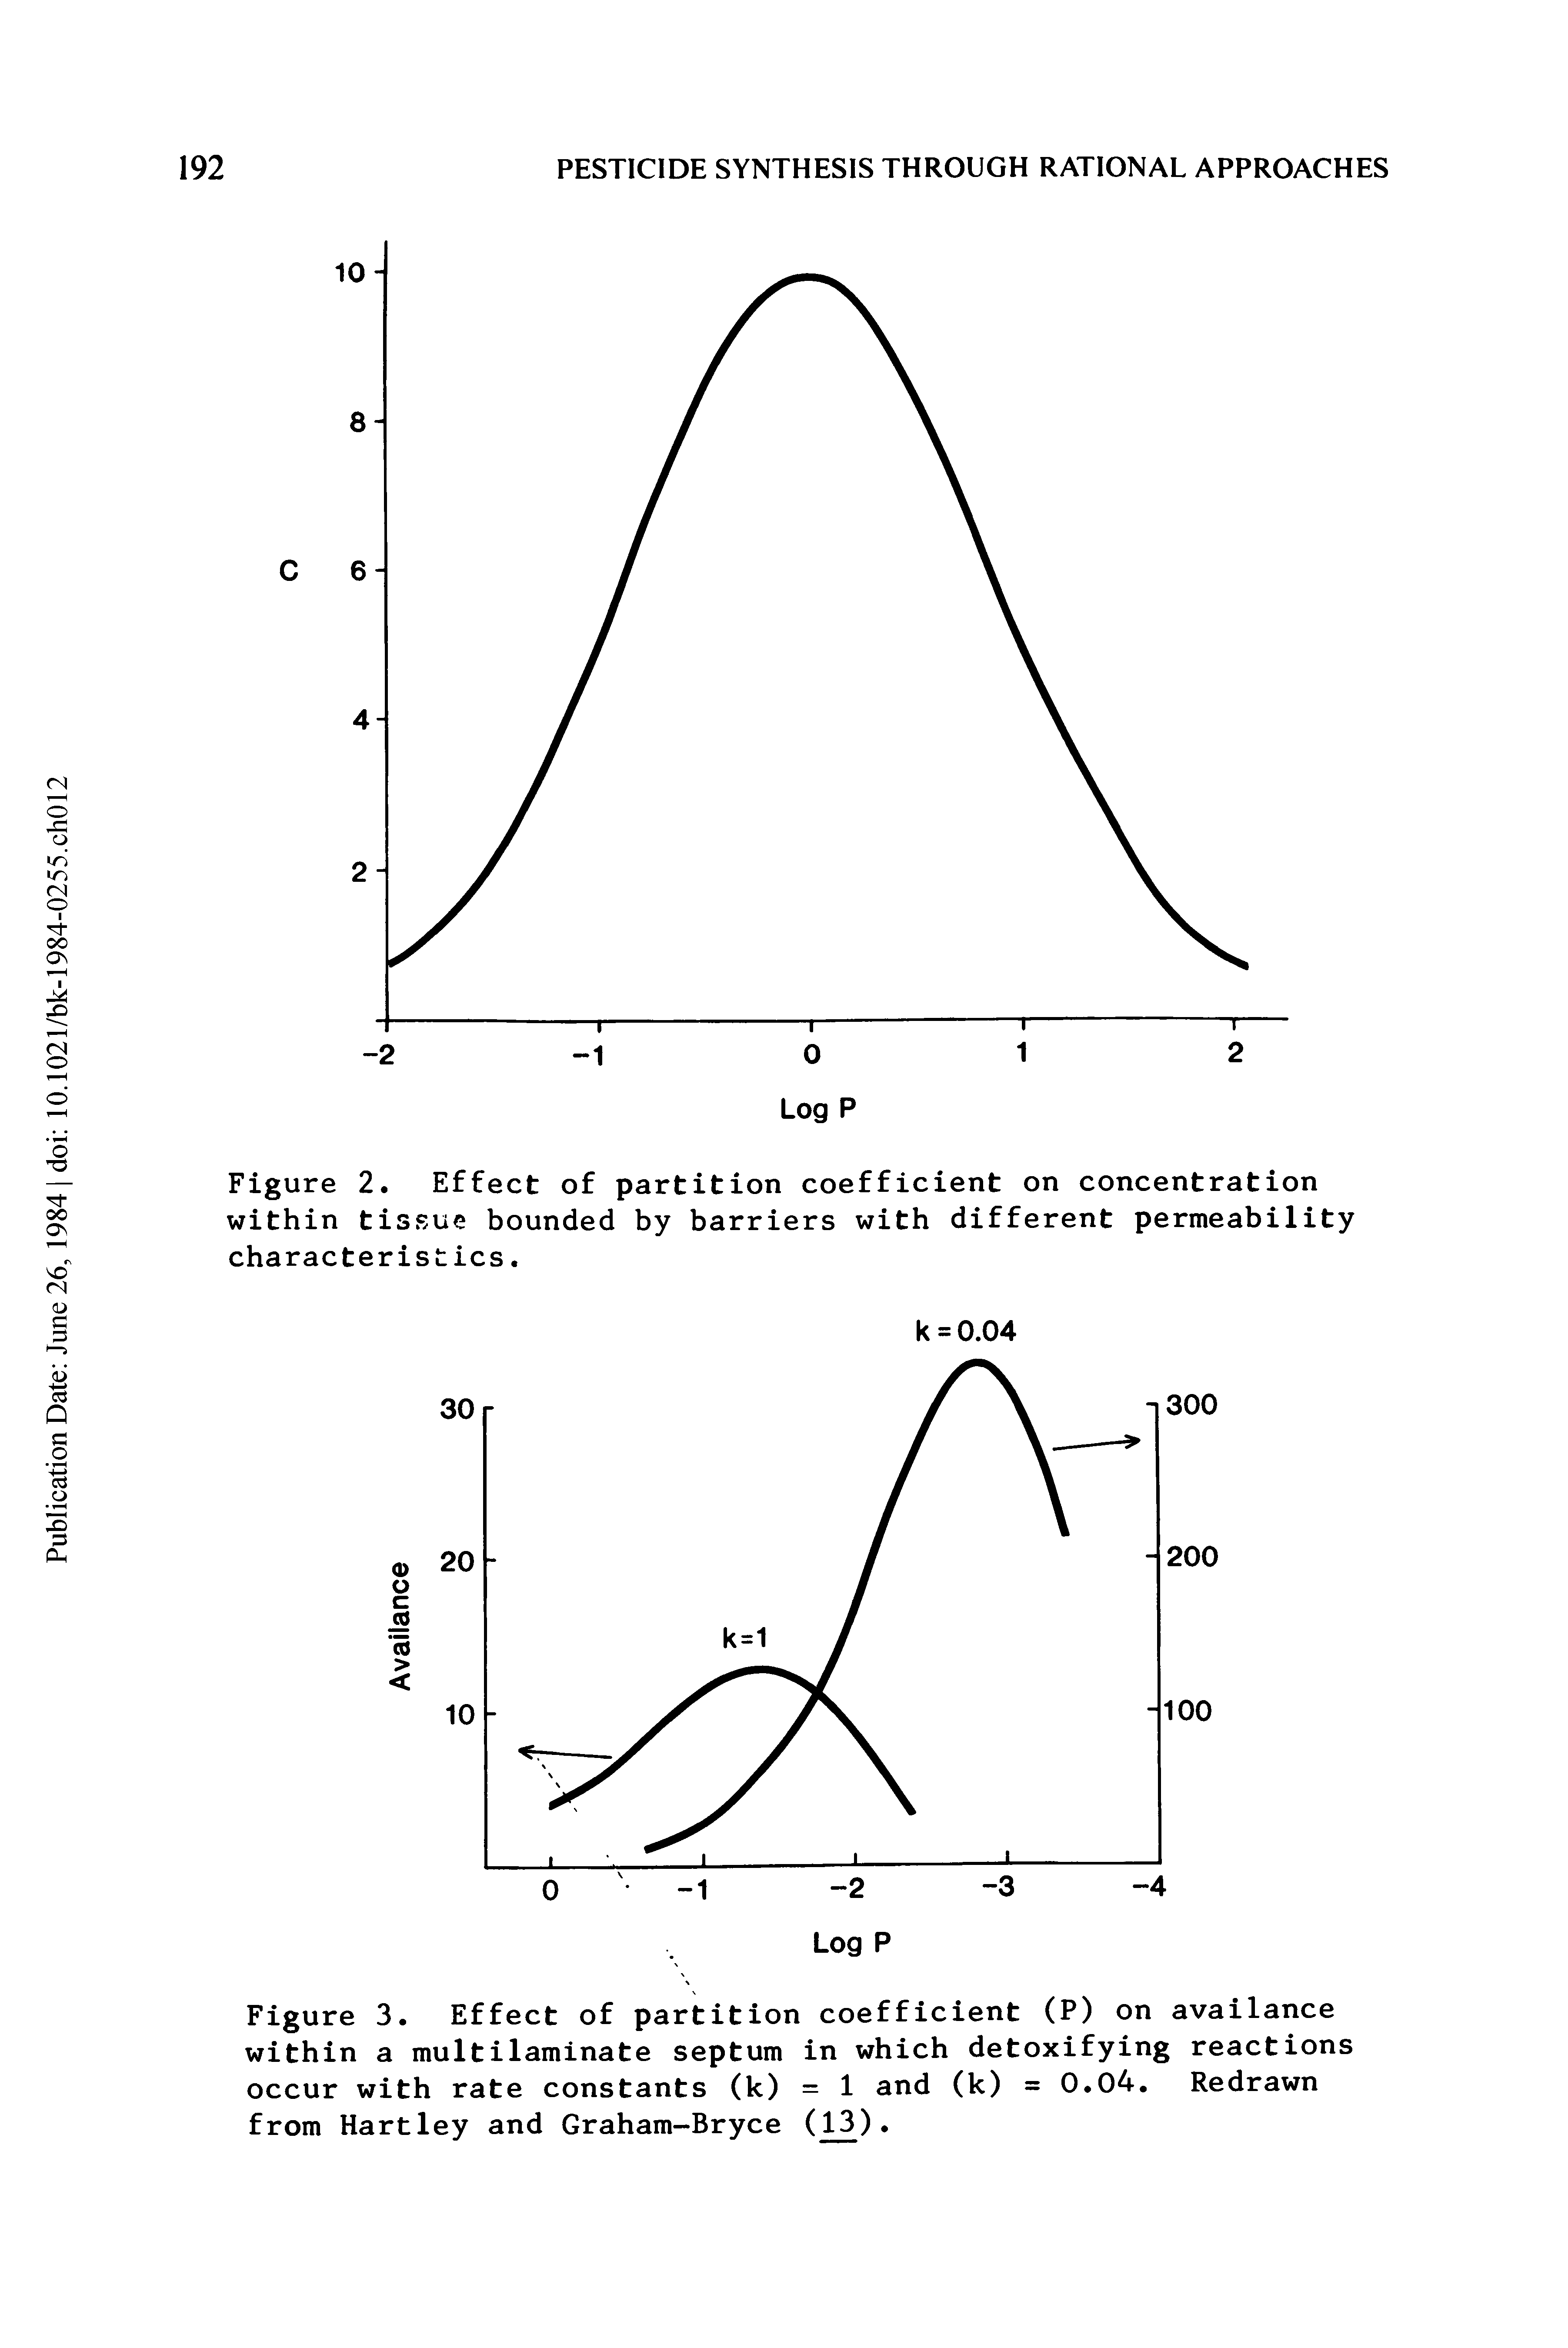 Figure 2. Effect of partition coefficient on concentration within tissue bounded by barriers with different permeability characteristics.